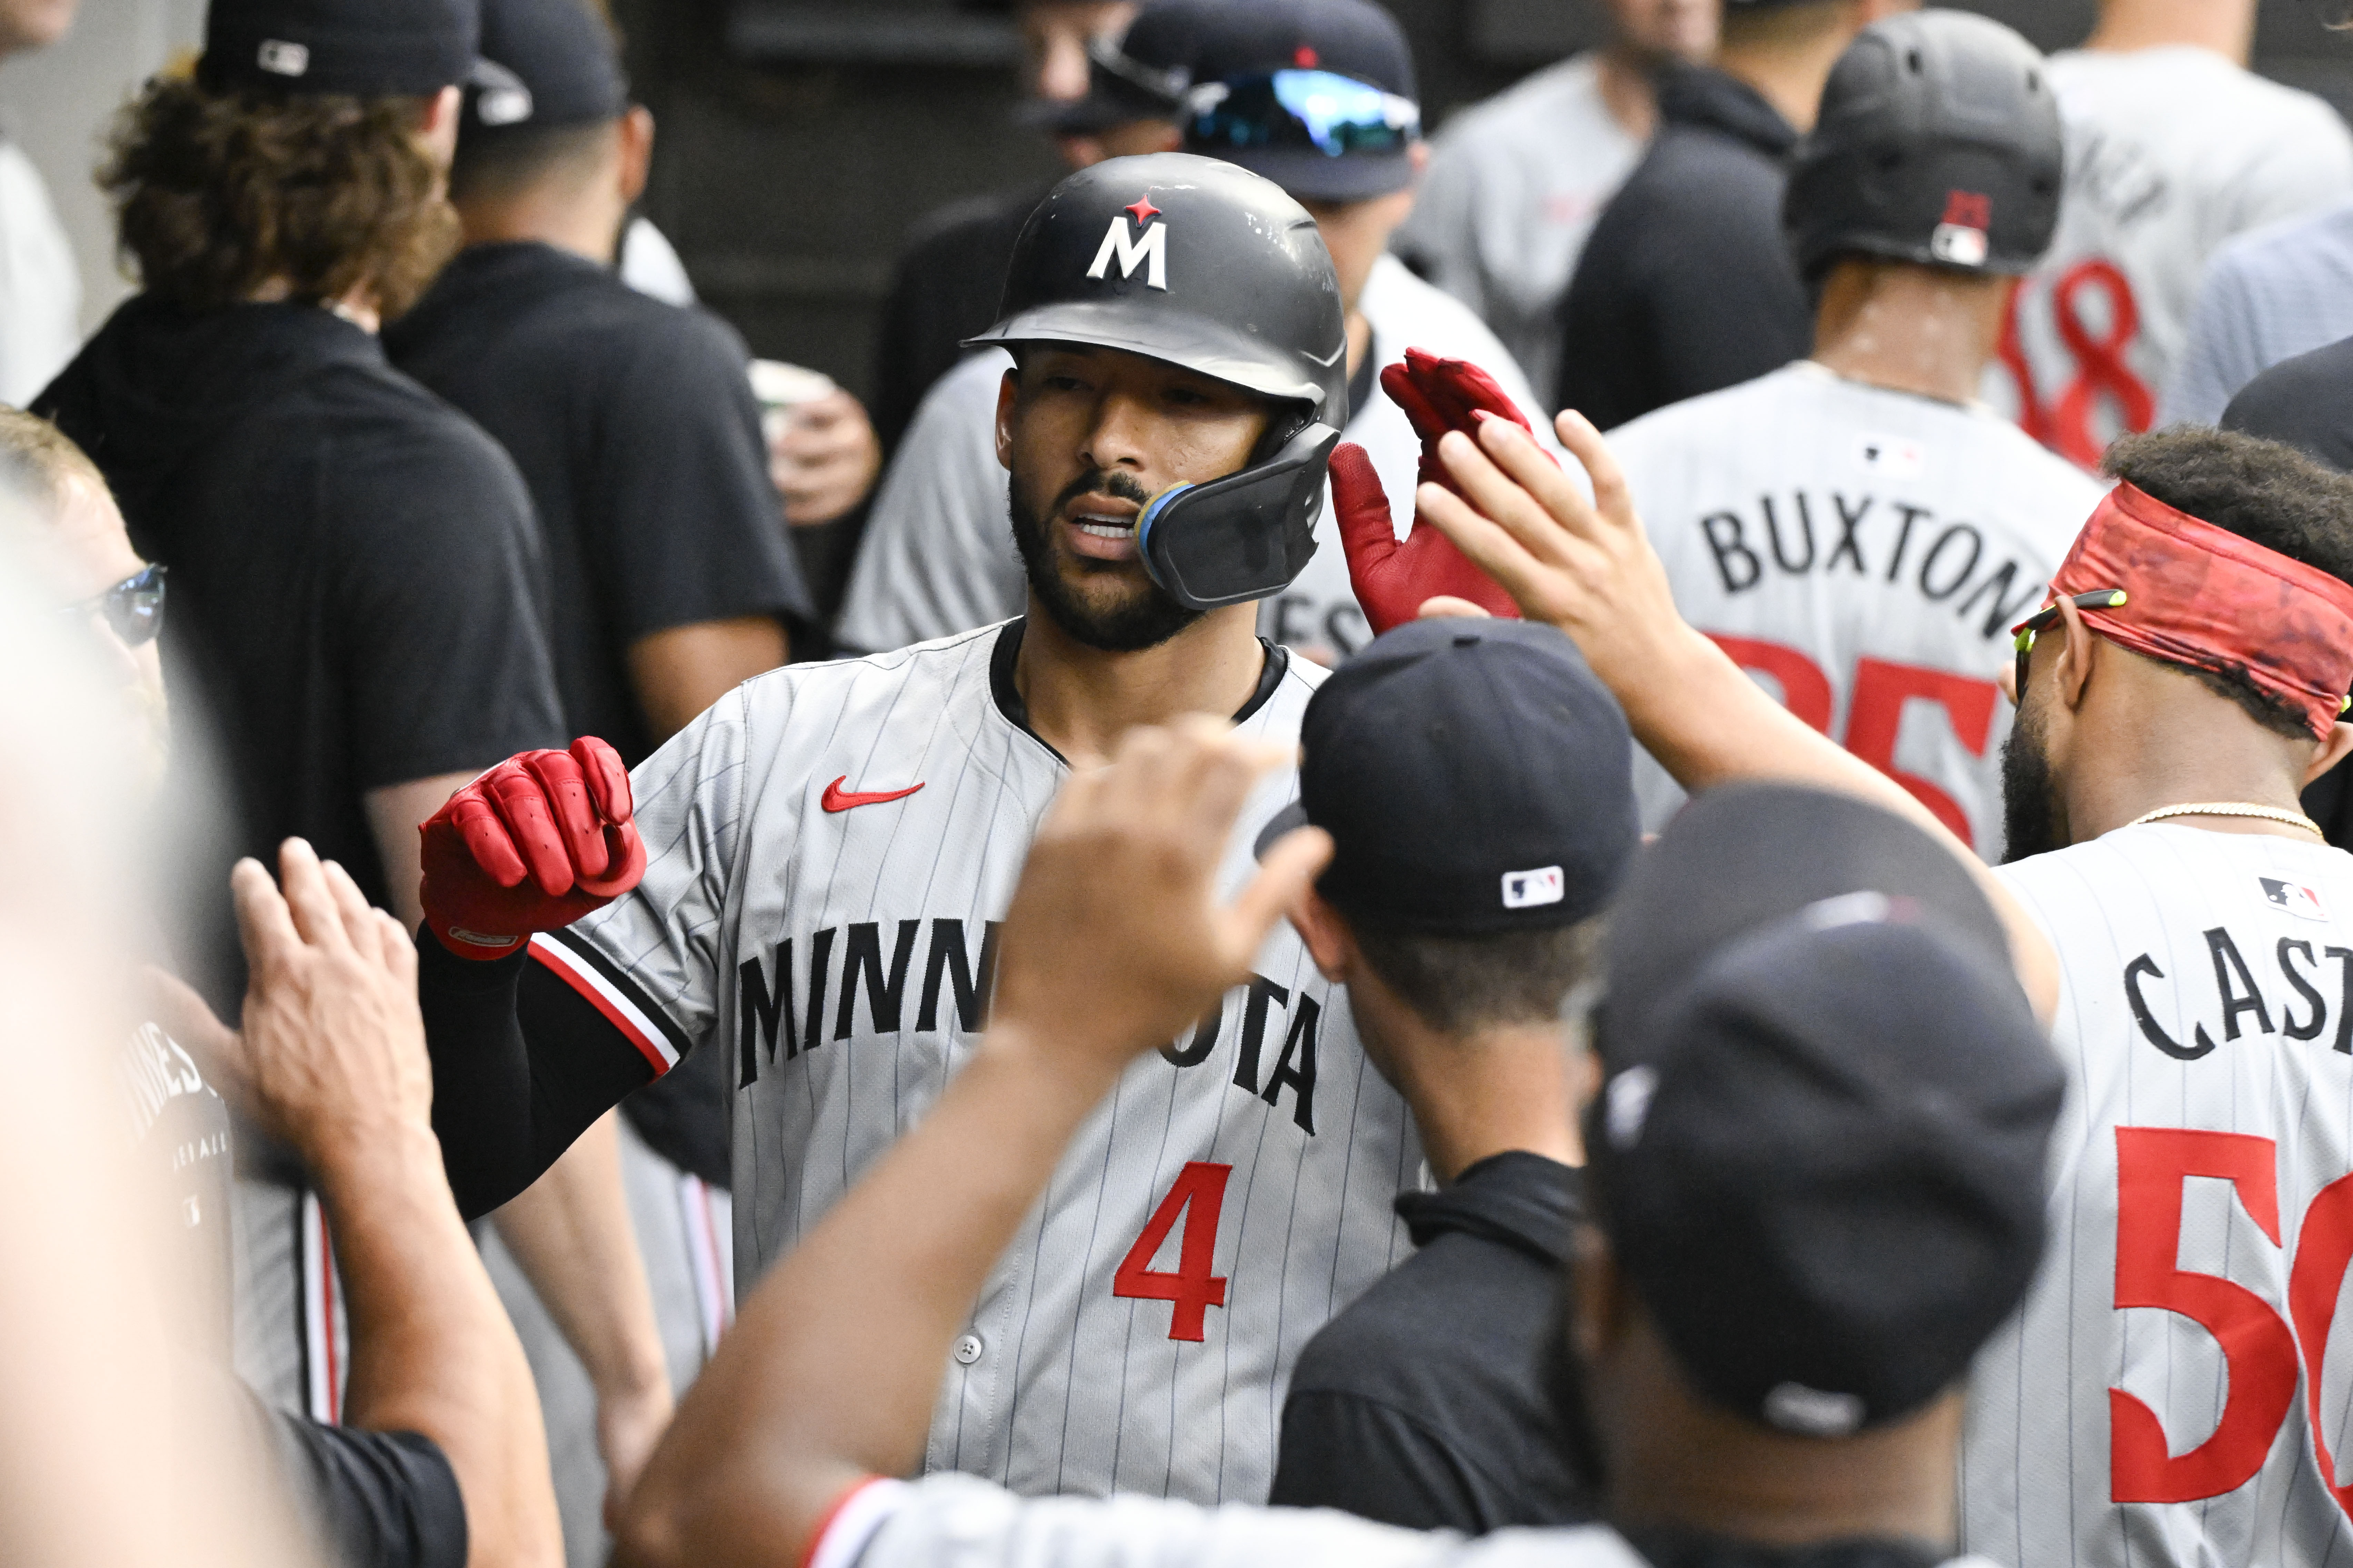 MLB: Game Two-Minnesota Twins at Chicago White Sox